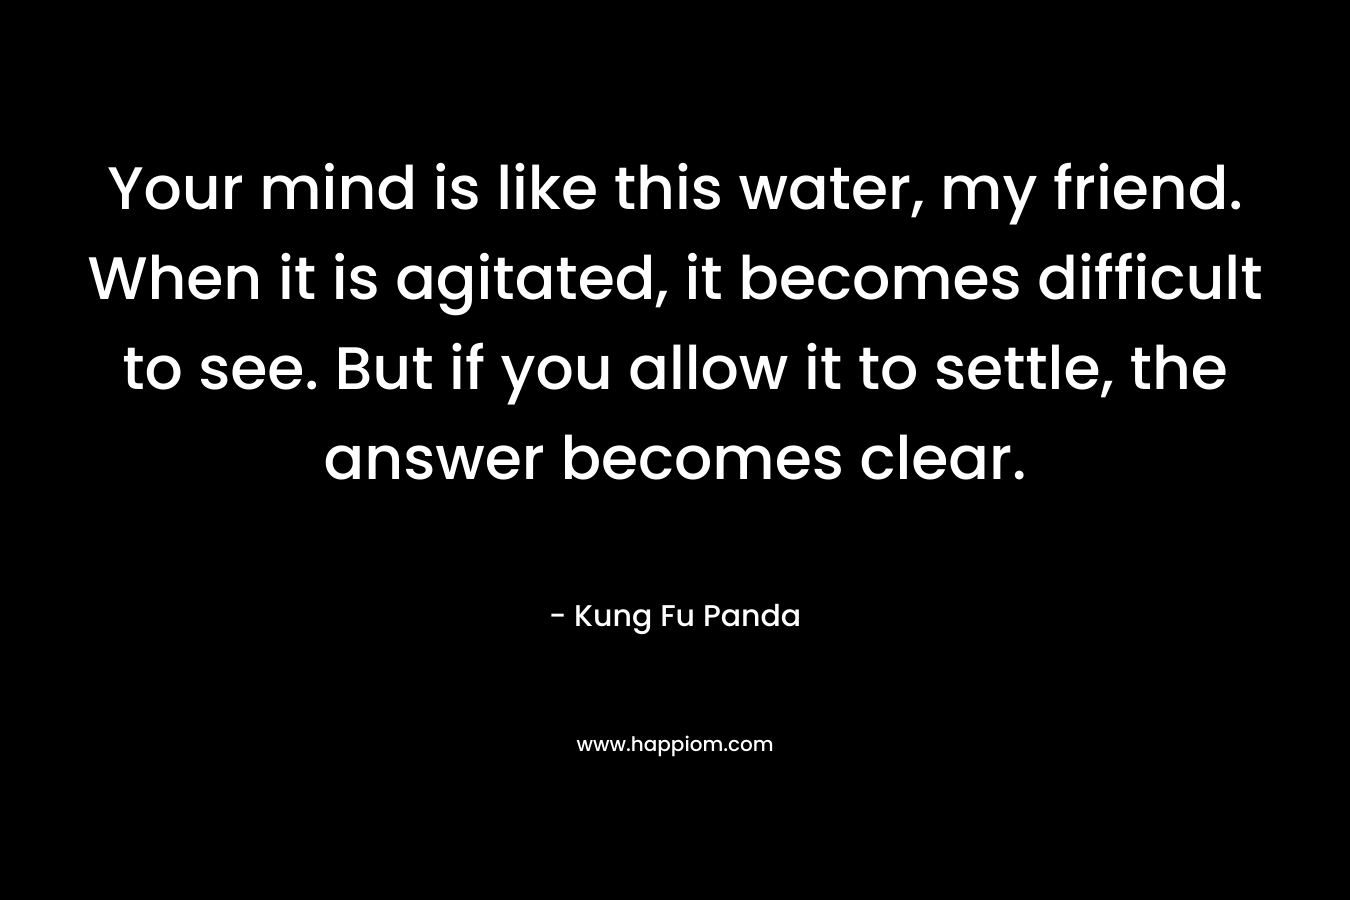 Your mind is like this water, my friend. When it is agitated, it becomes difficult to see. But if you allow it to settle, the answer becomes clear. – Kung Fu Panda